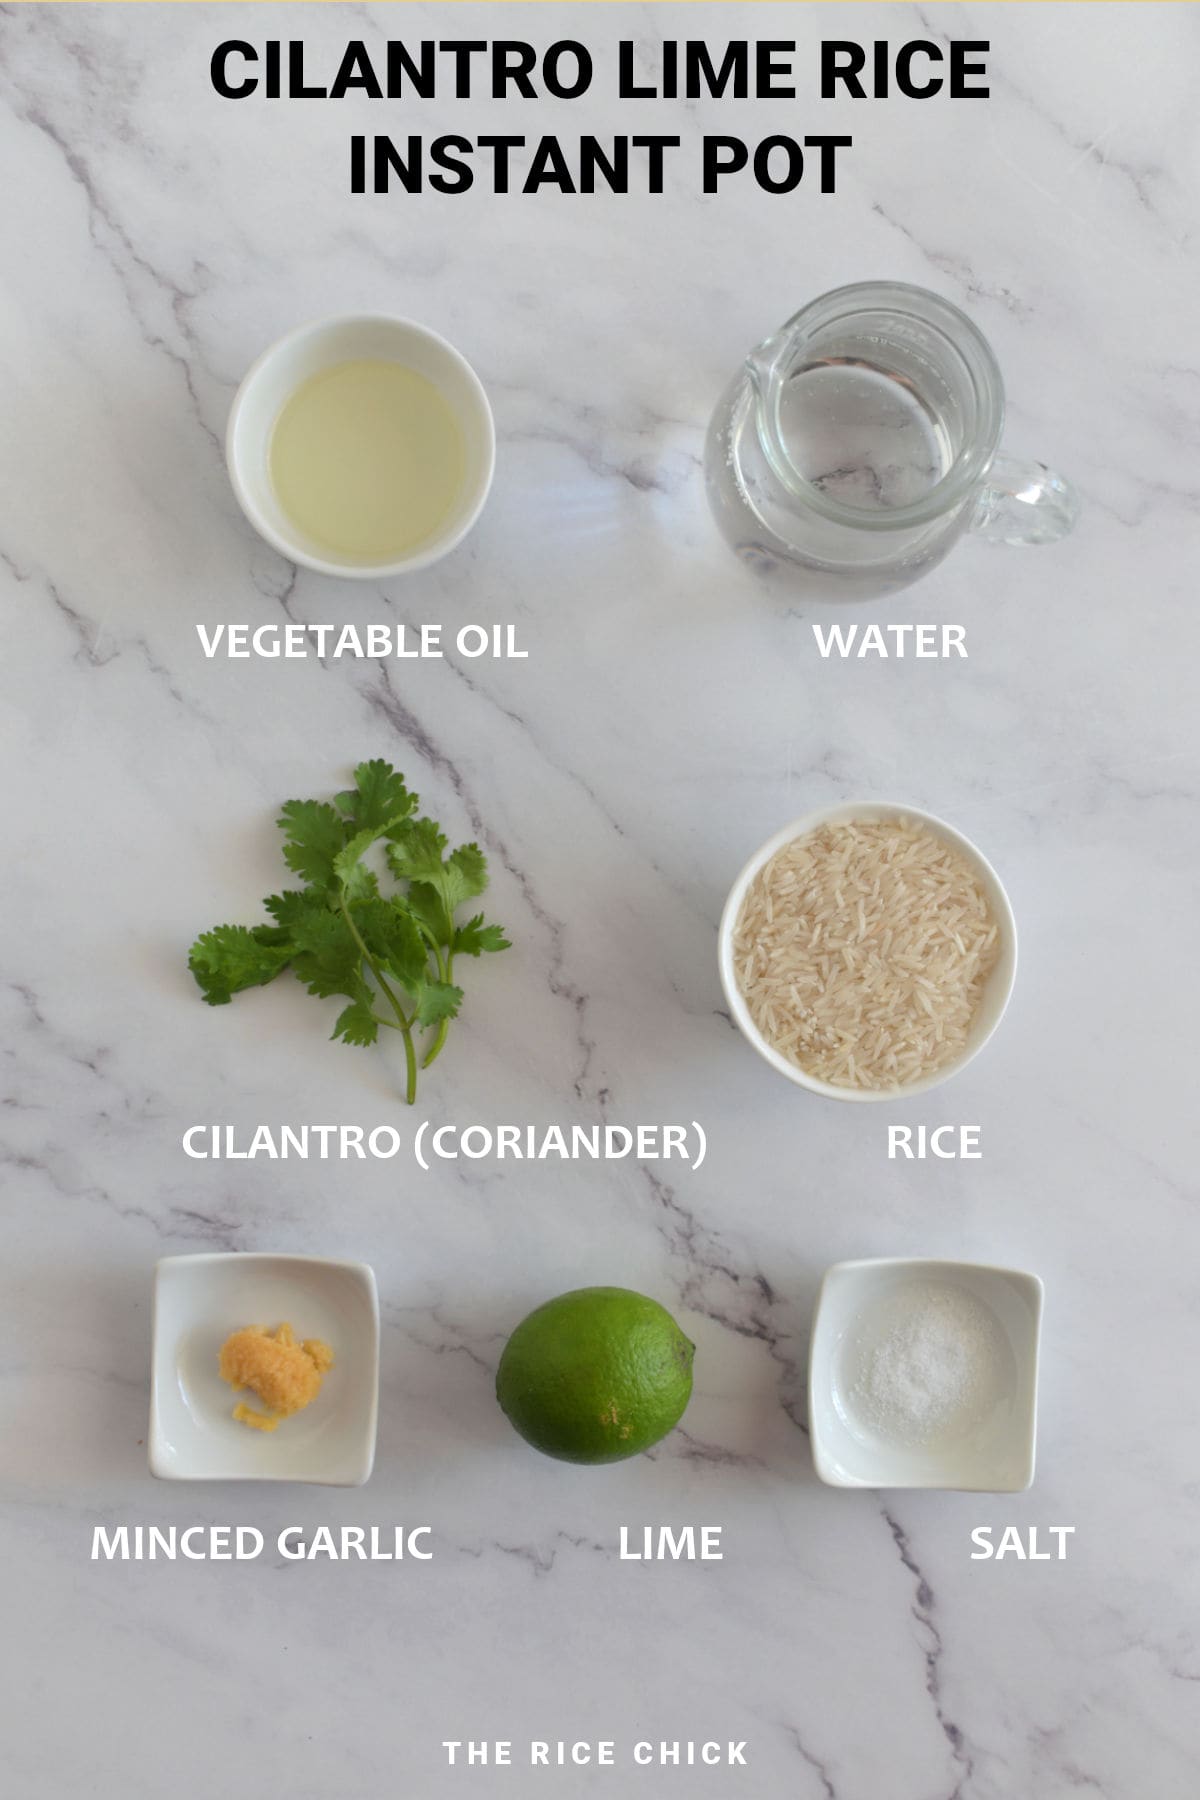 Ingredients for cilantro lime rice in the Instant Pot.